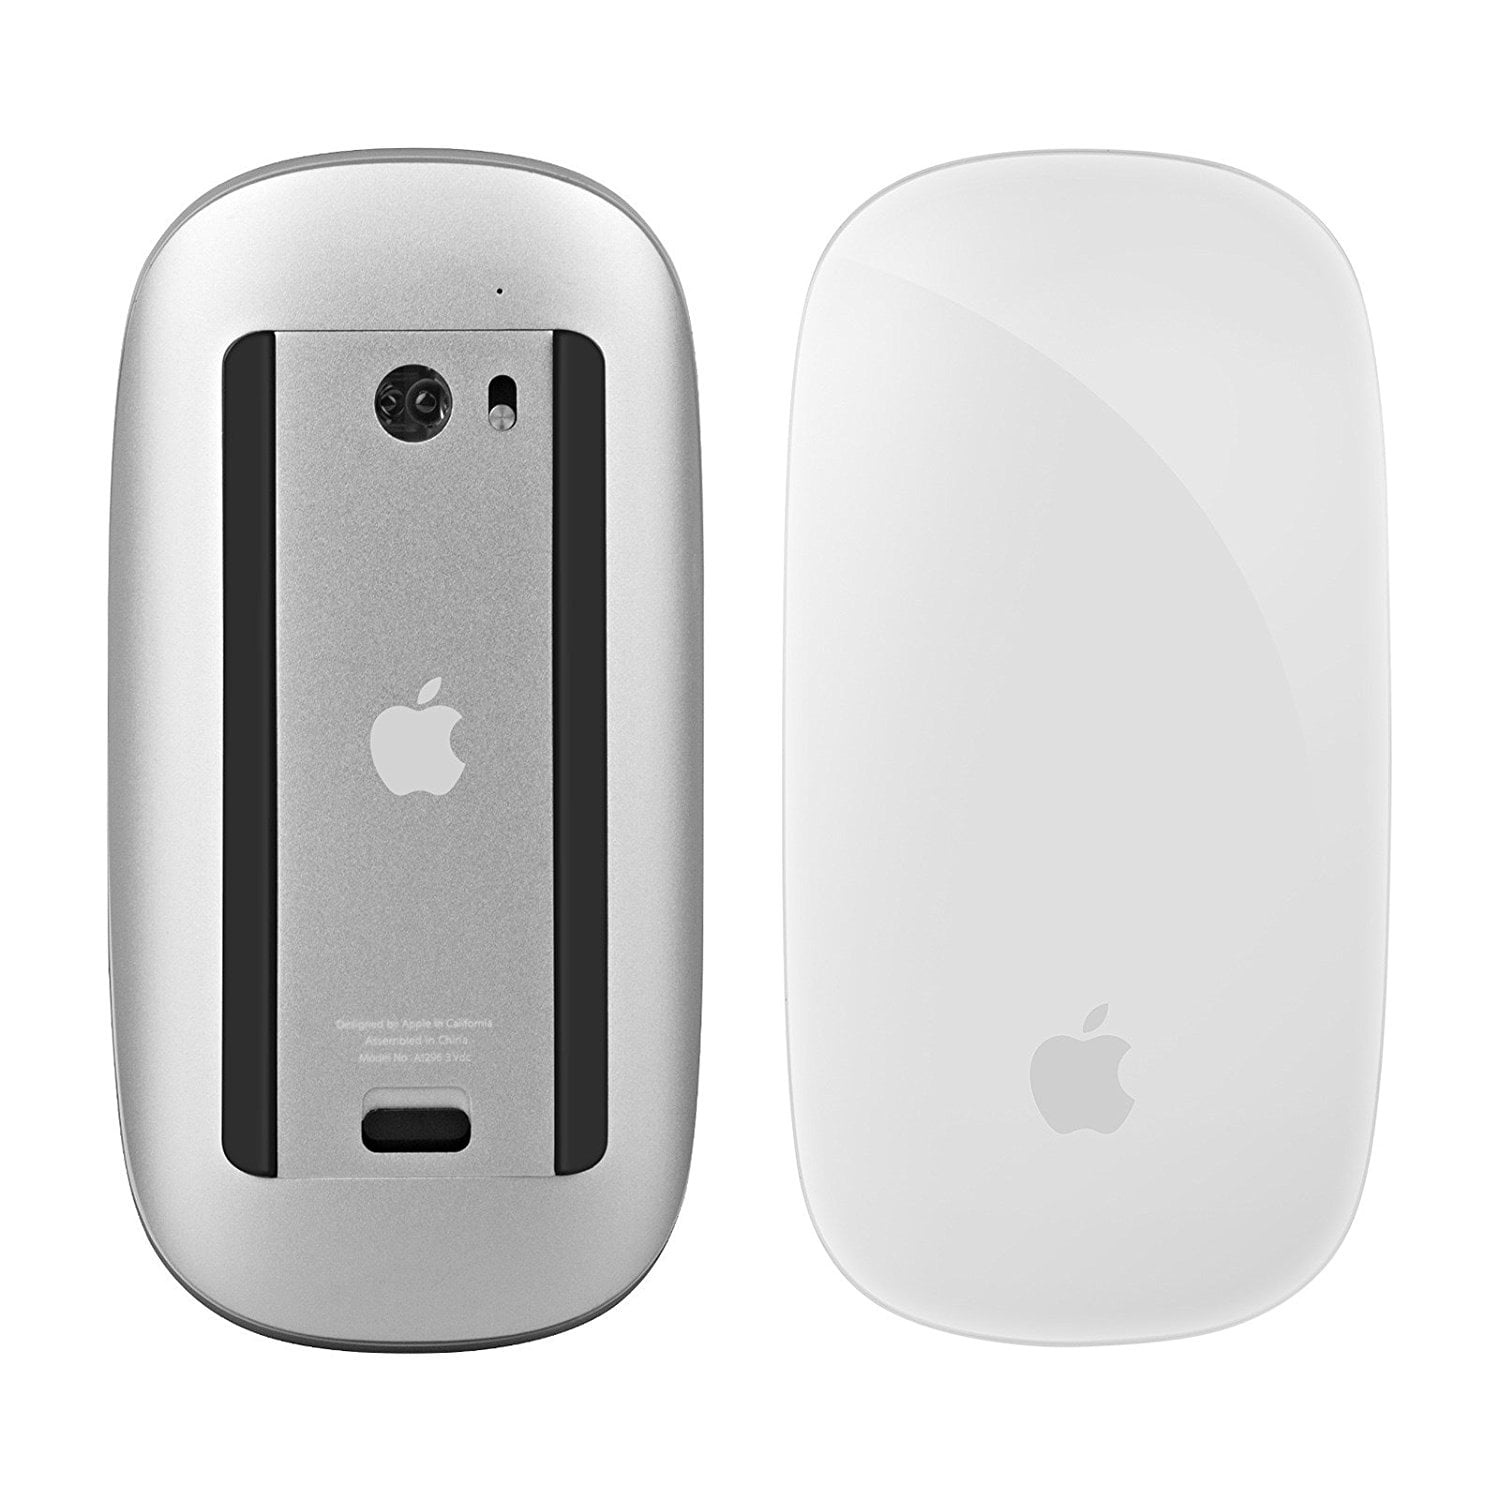 Restored Apple Magic Bluetooth White Wireless Laser MB829LL/A (Refurbished) A1296 Mouse 